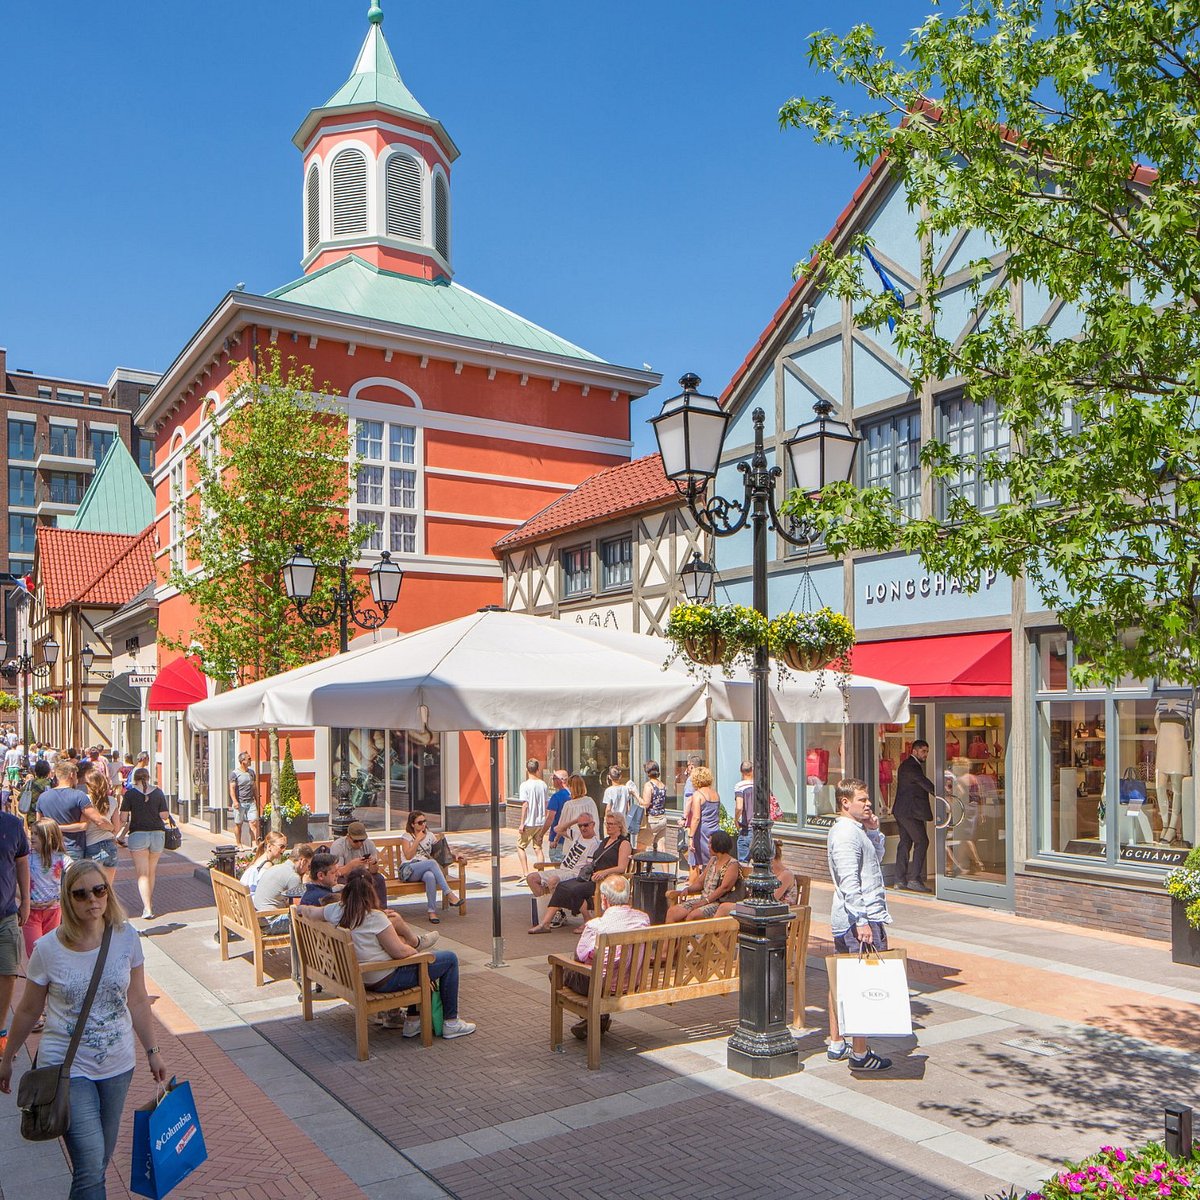 Designer Outlet Roermond ?w=1200&h=1200&s=1